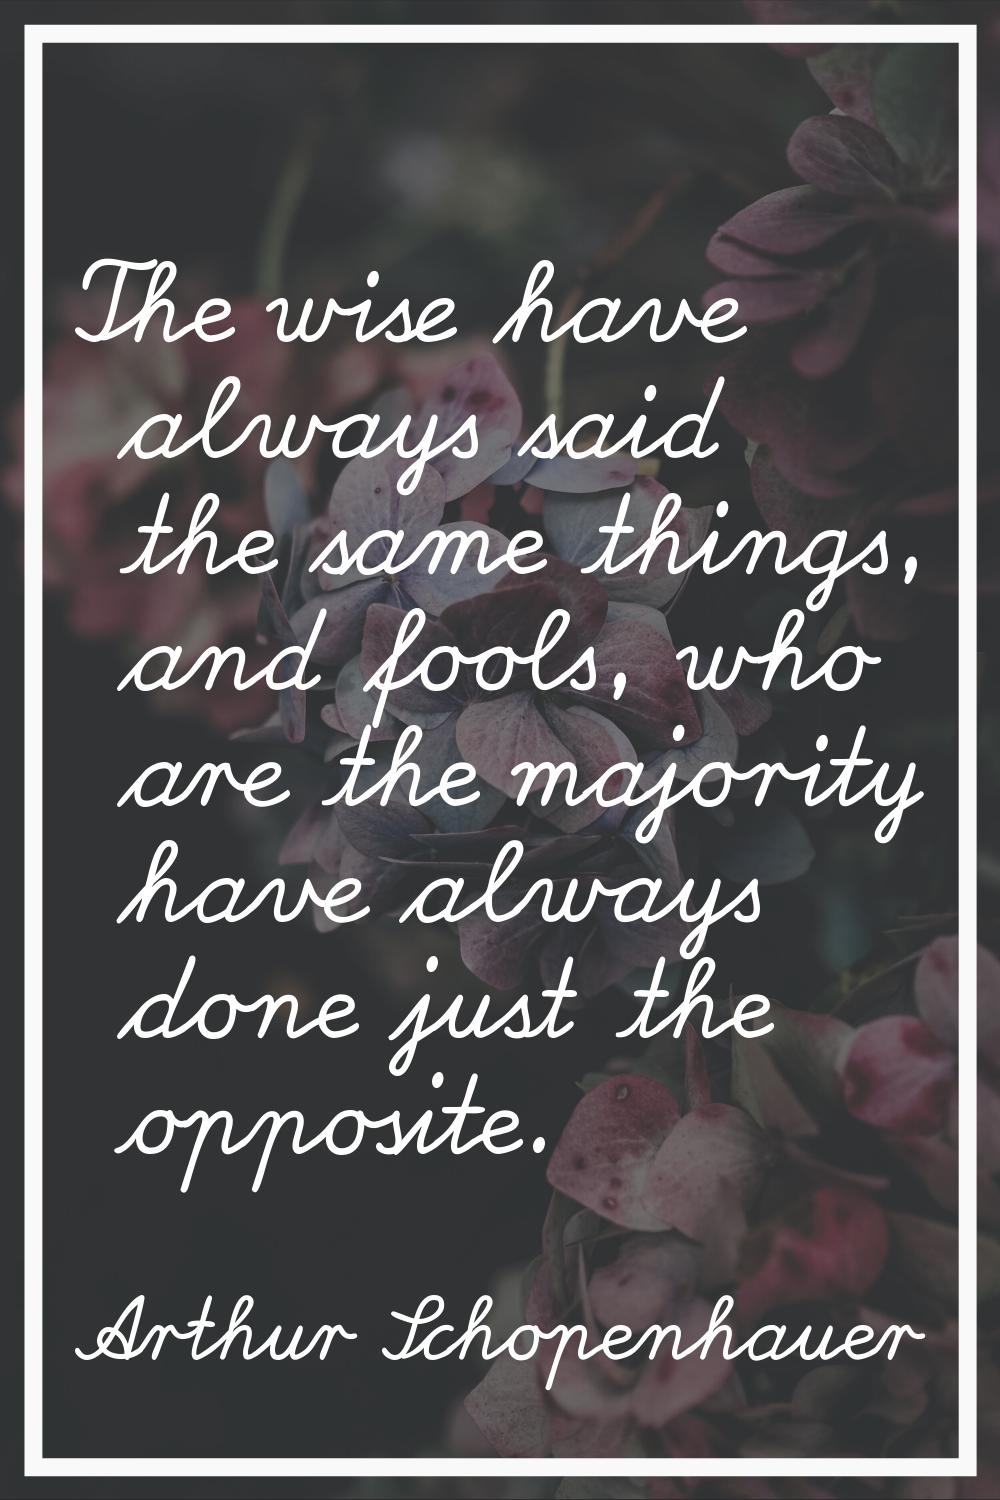 The wise have always said the same things, and fools, who are the majority have always done just th